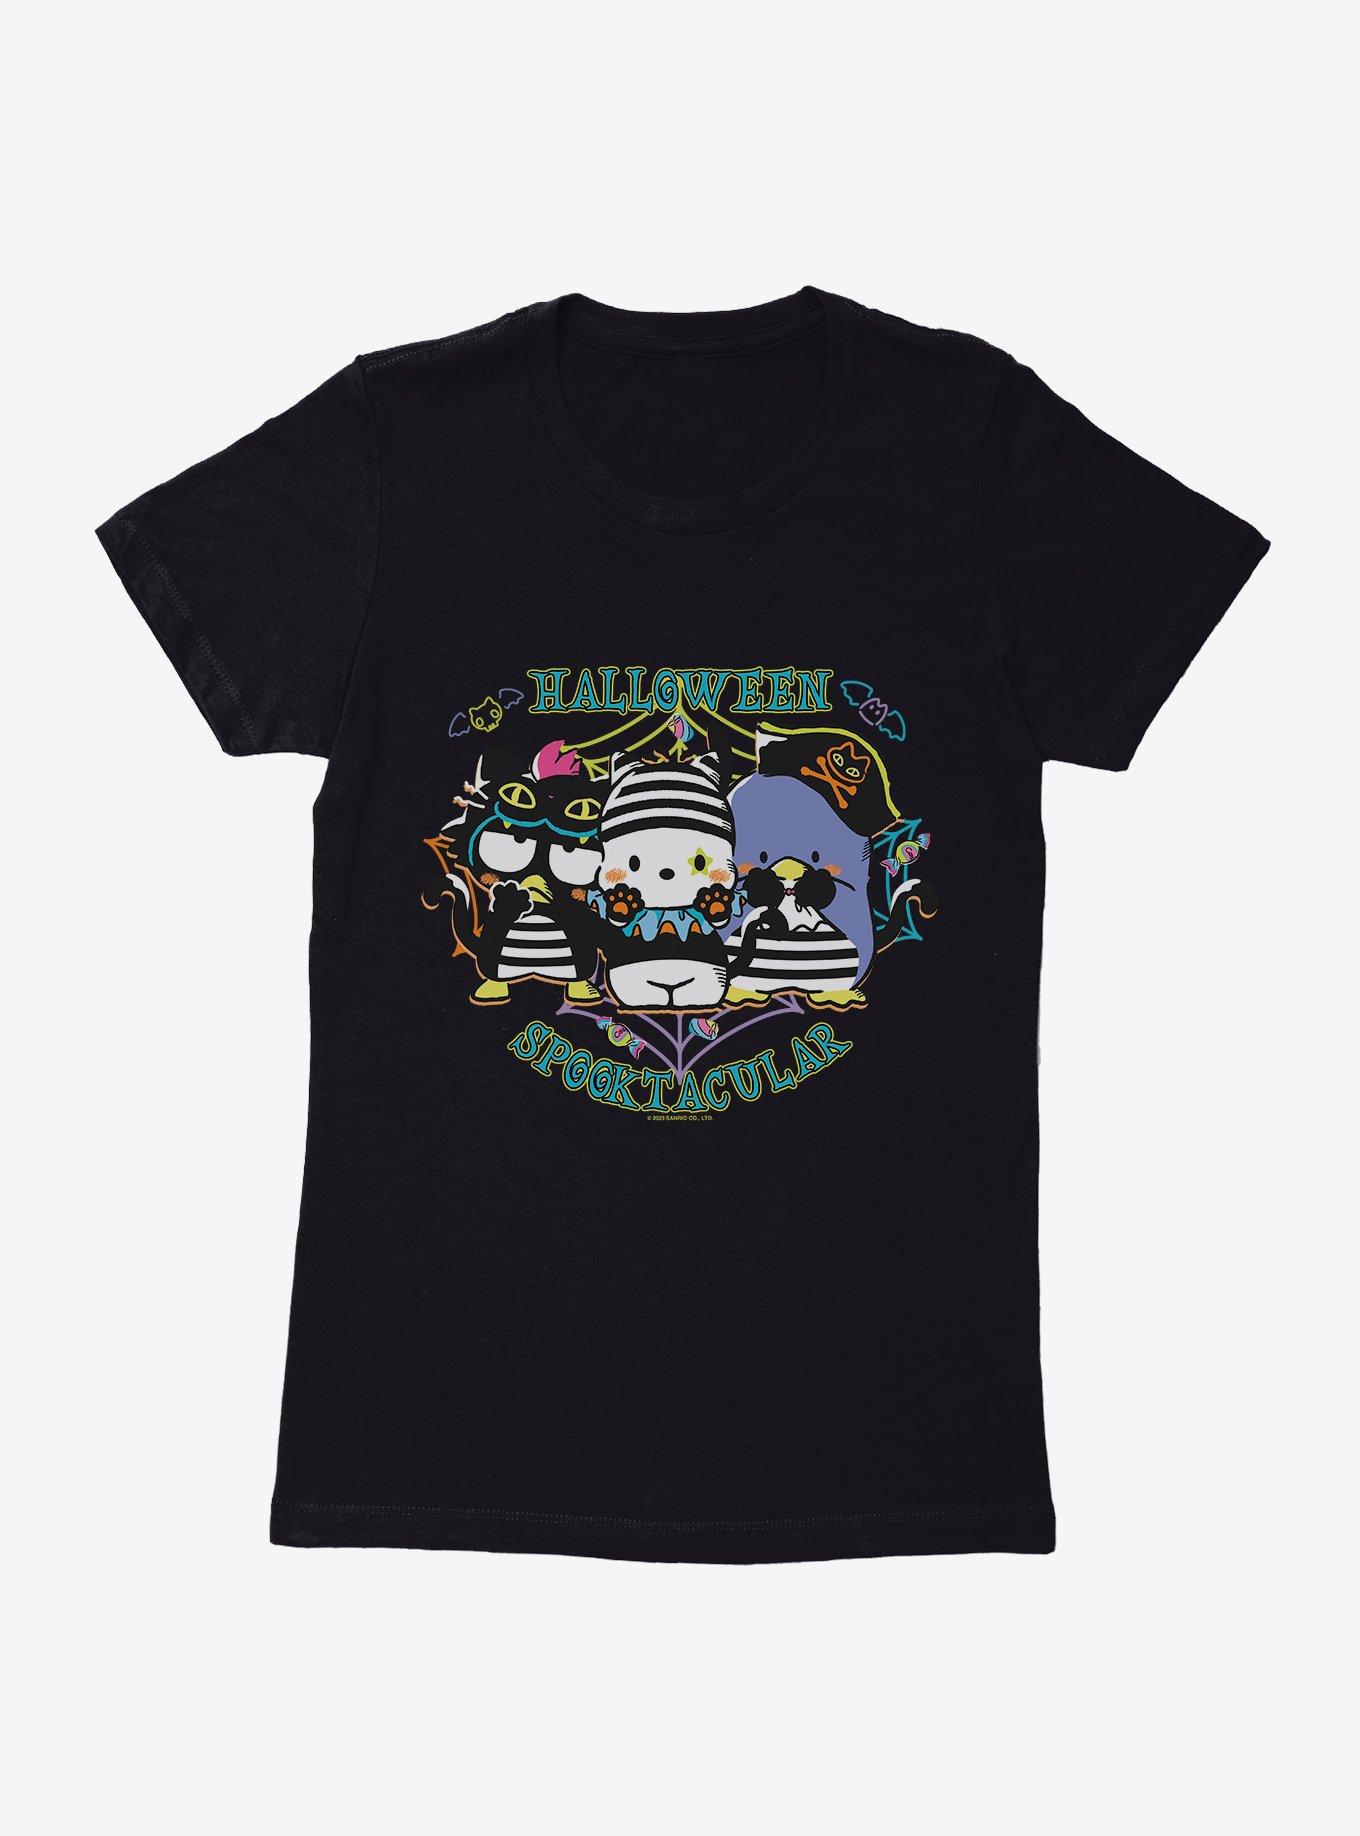 Hello Kitty And Friends Halloween Spooktacular Womens T-Shirt, BLACK, hi-res